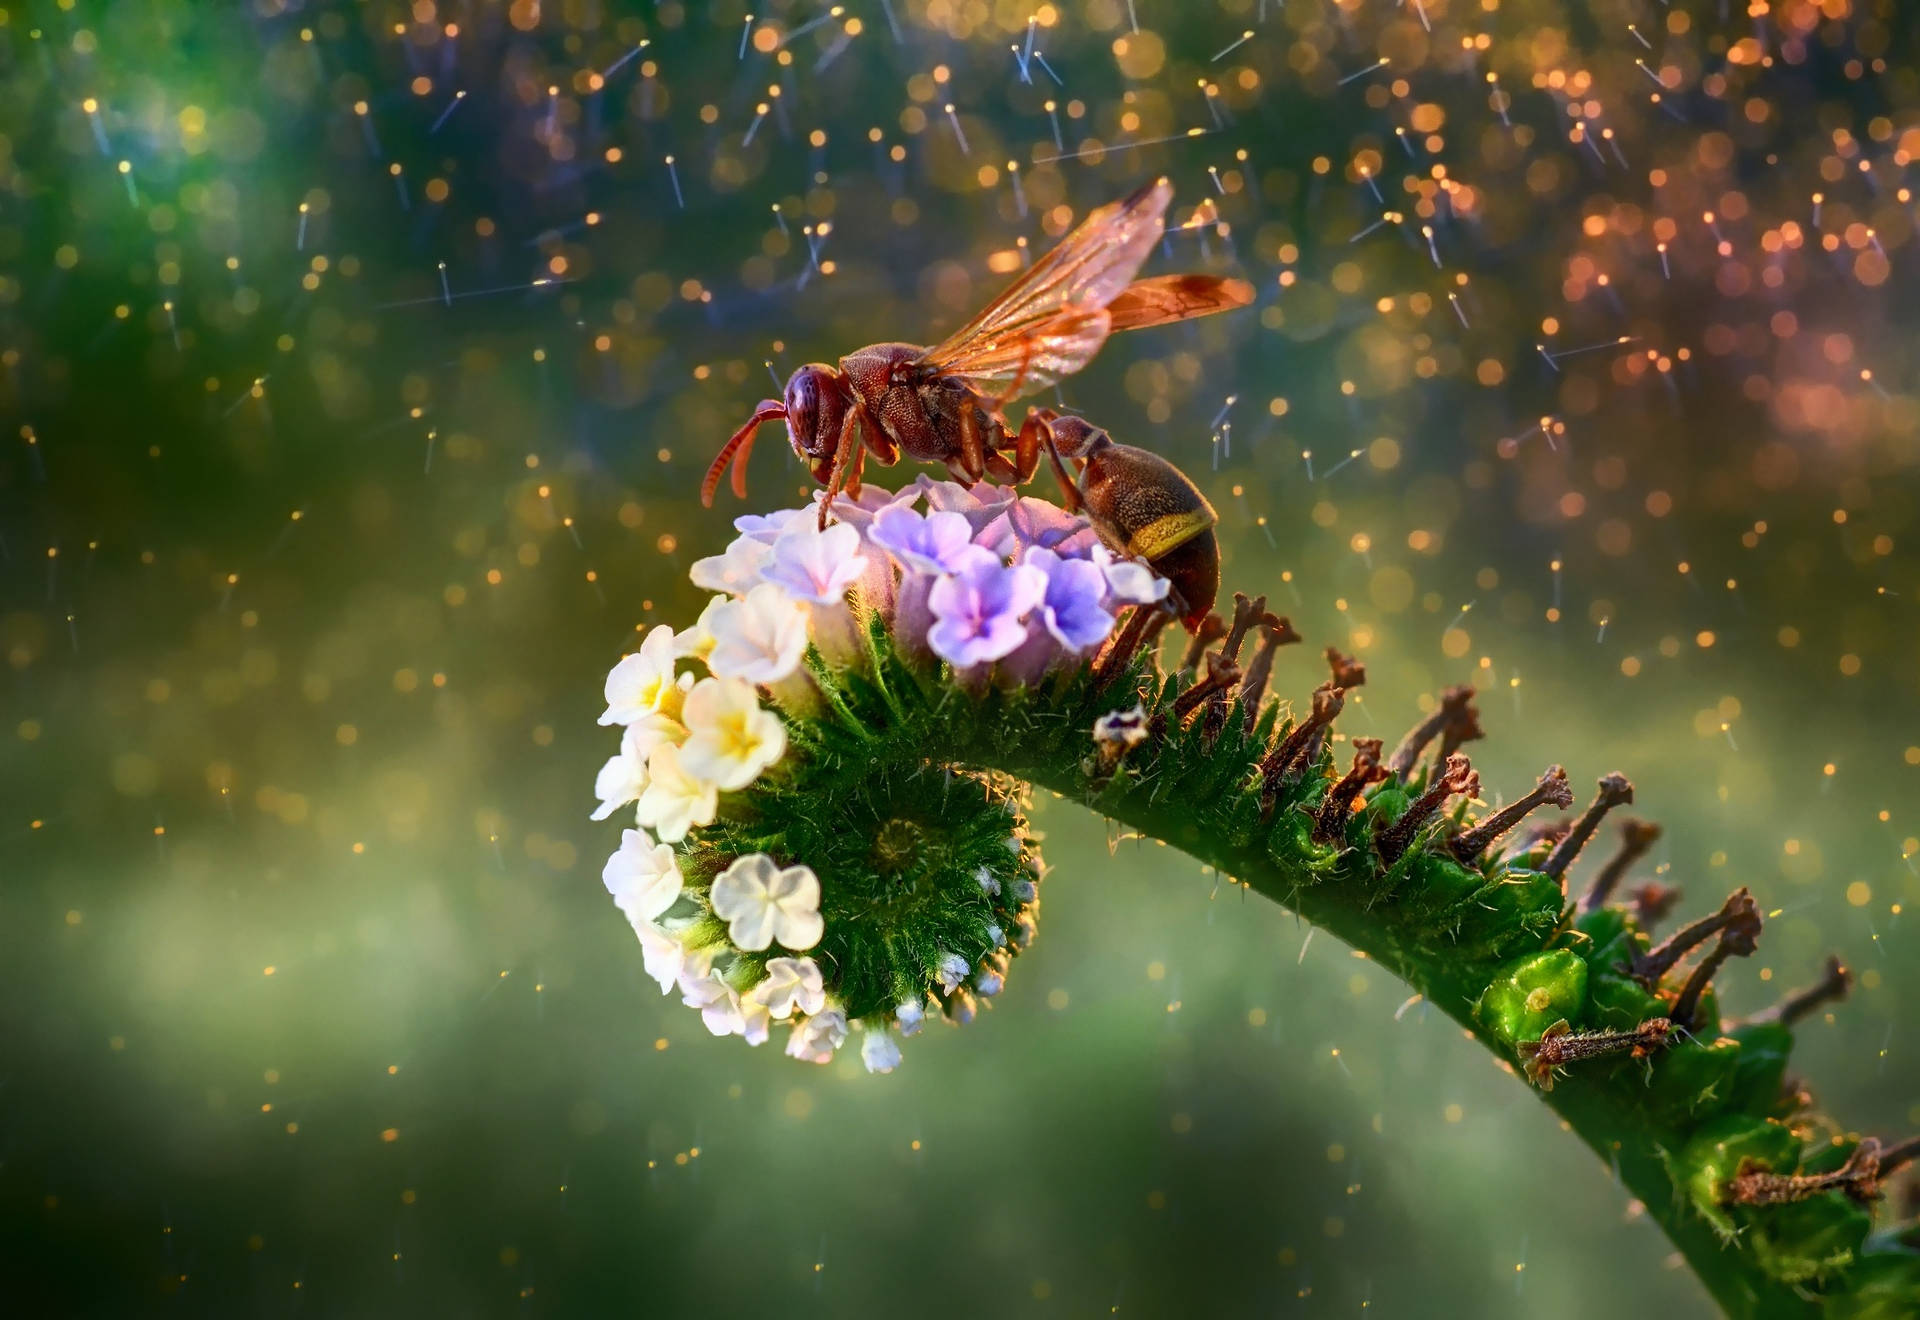 Insect Perched On Colorful Flowers Background